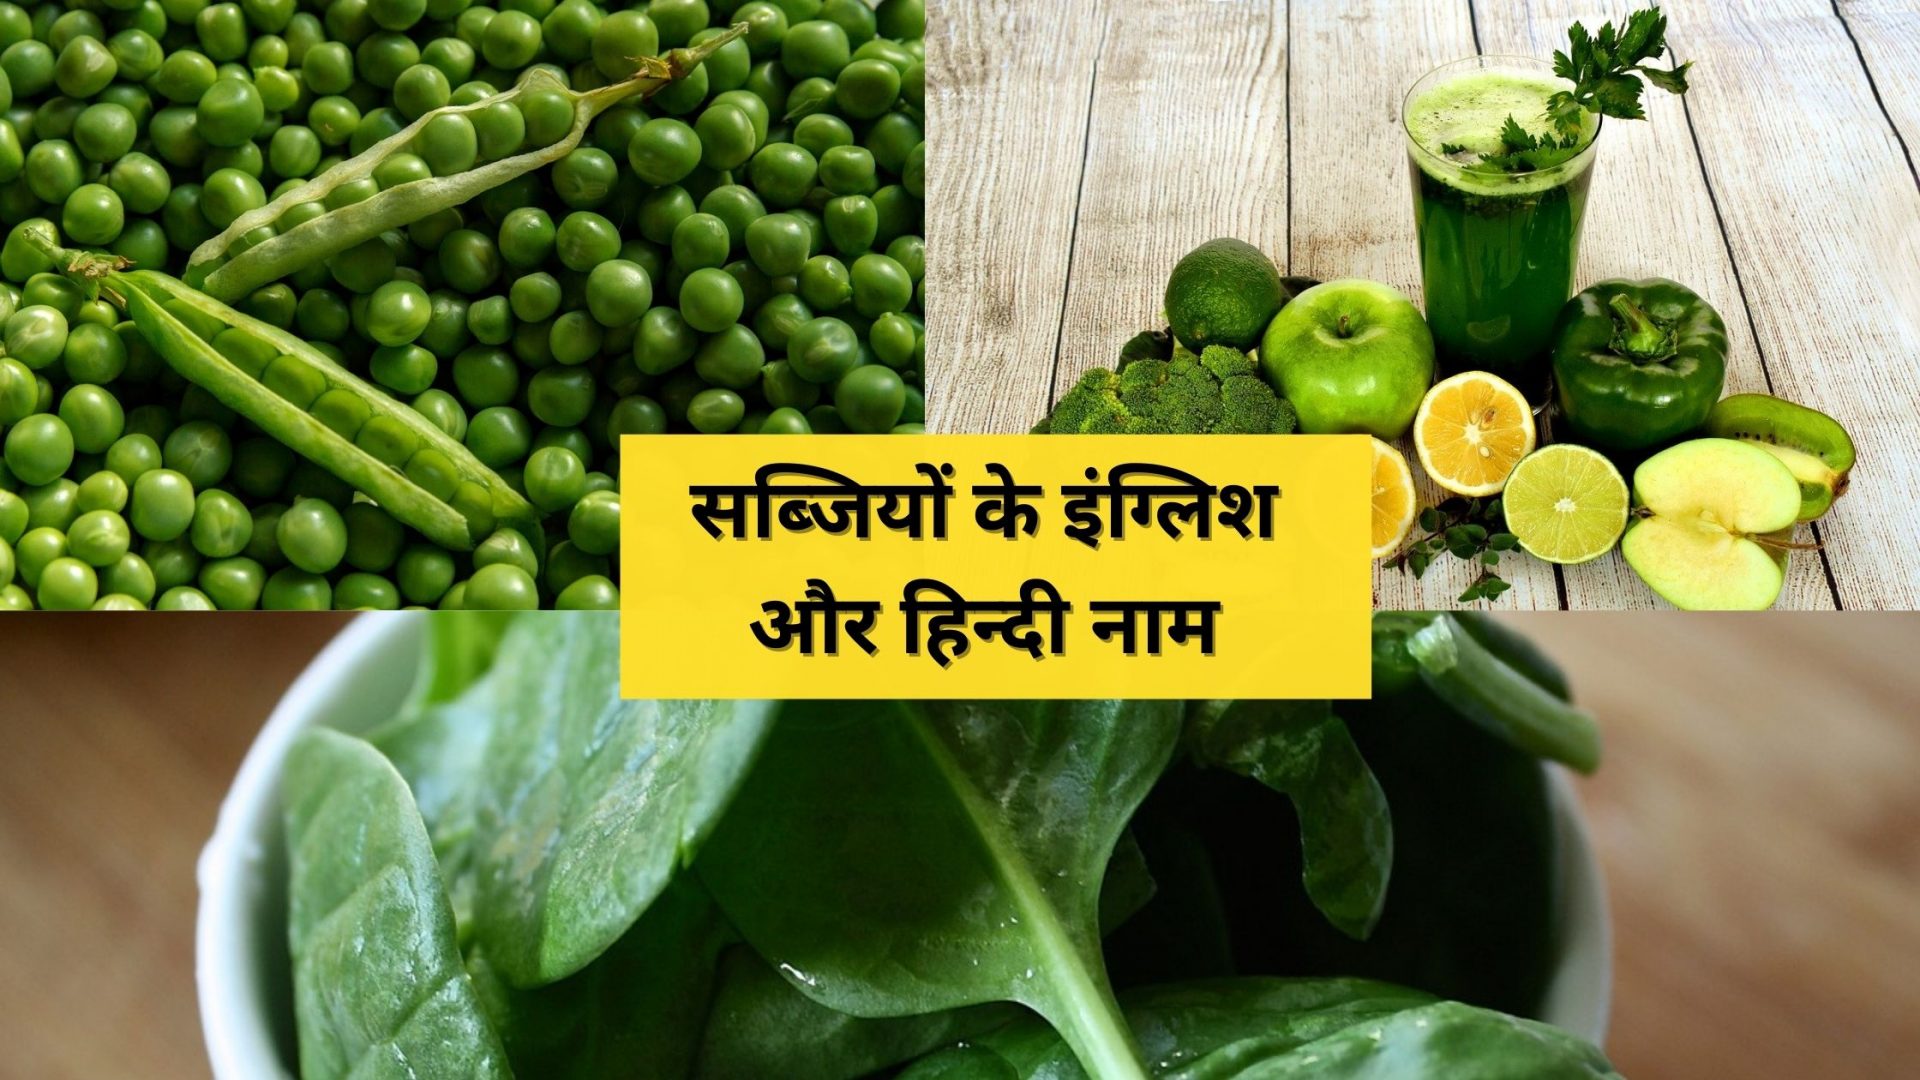 Vegetables Name In English And Hindi